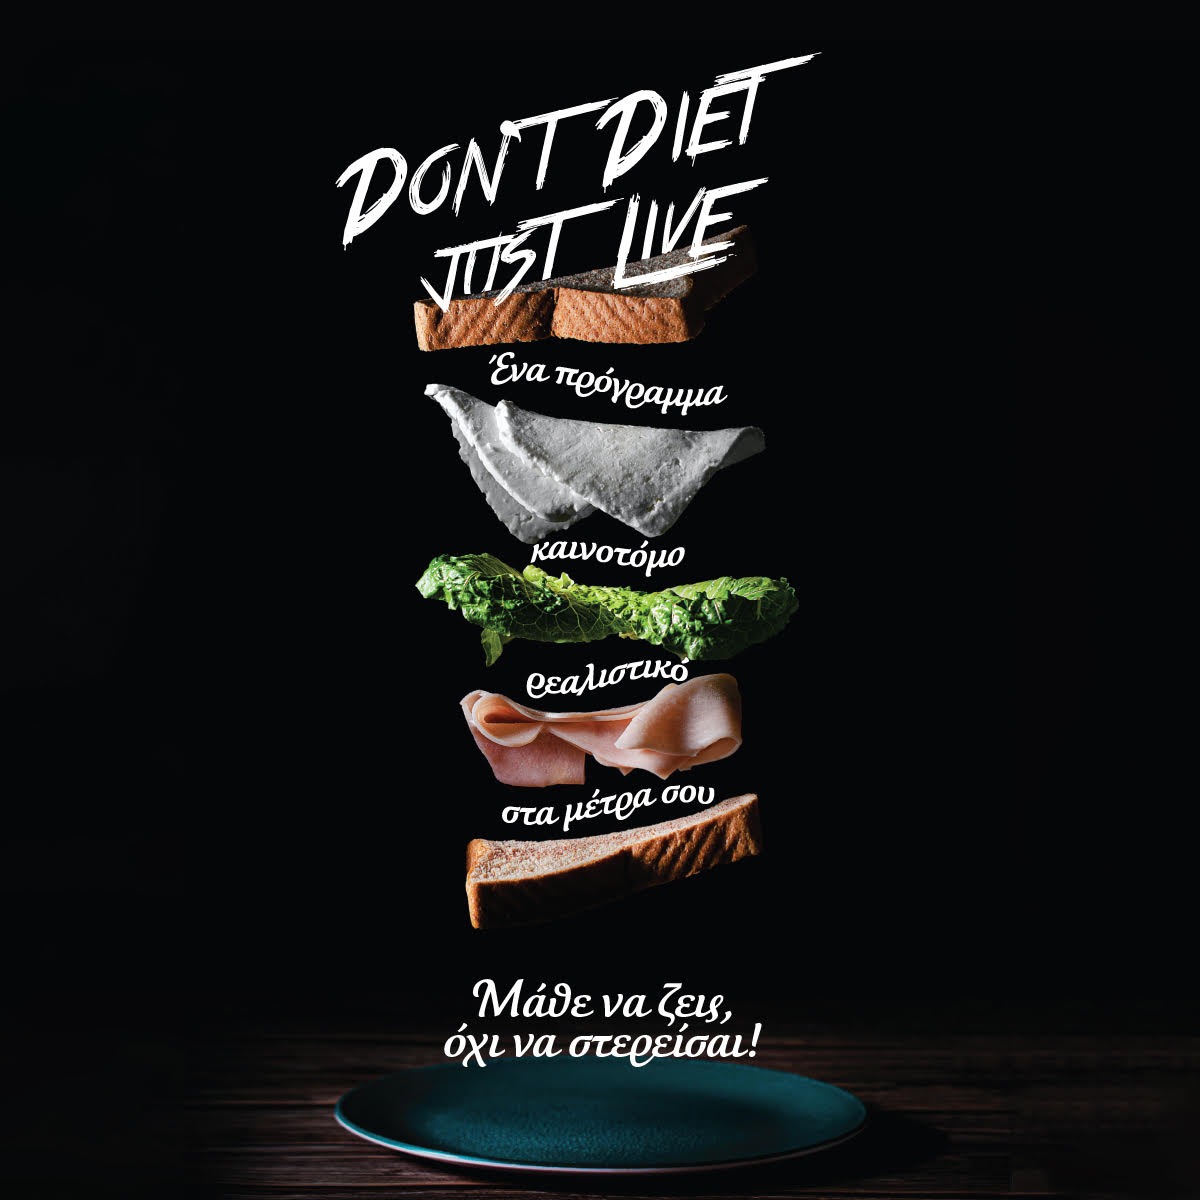 Dont Diet Just live